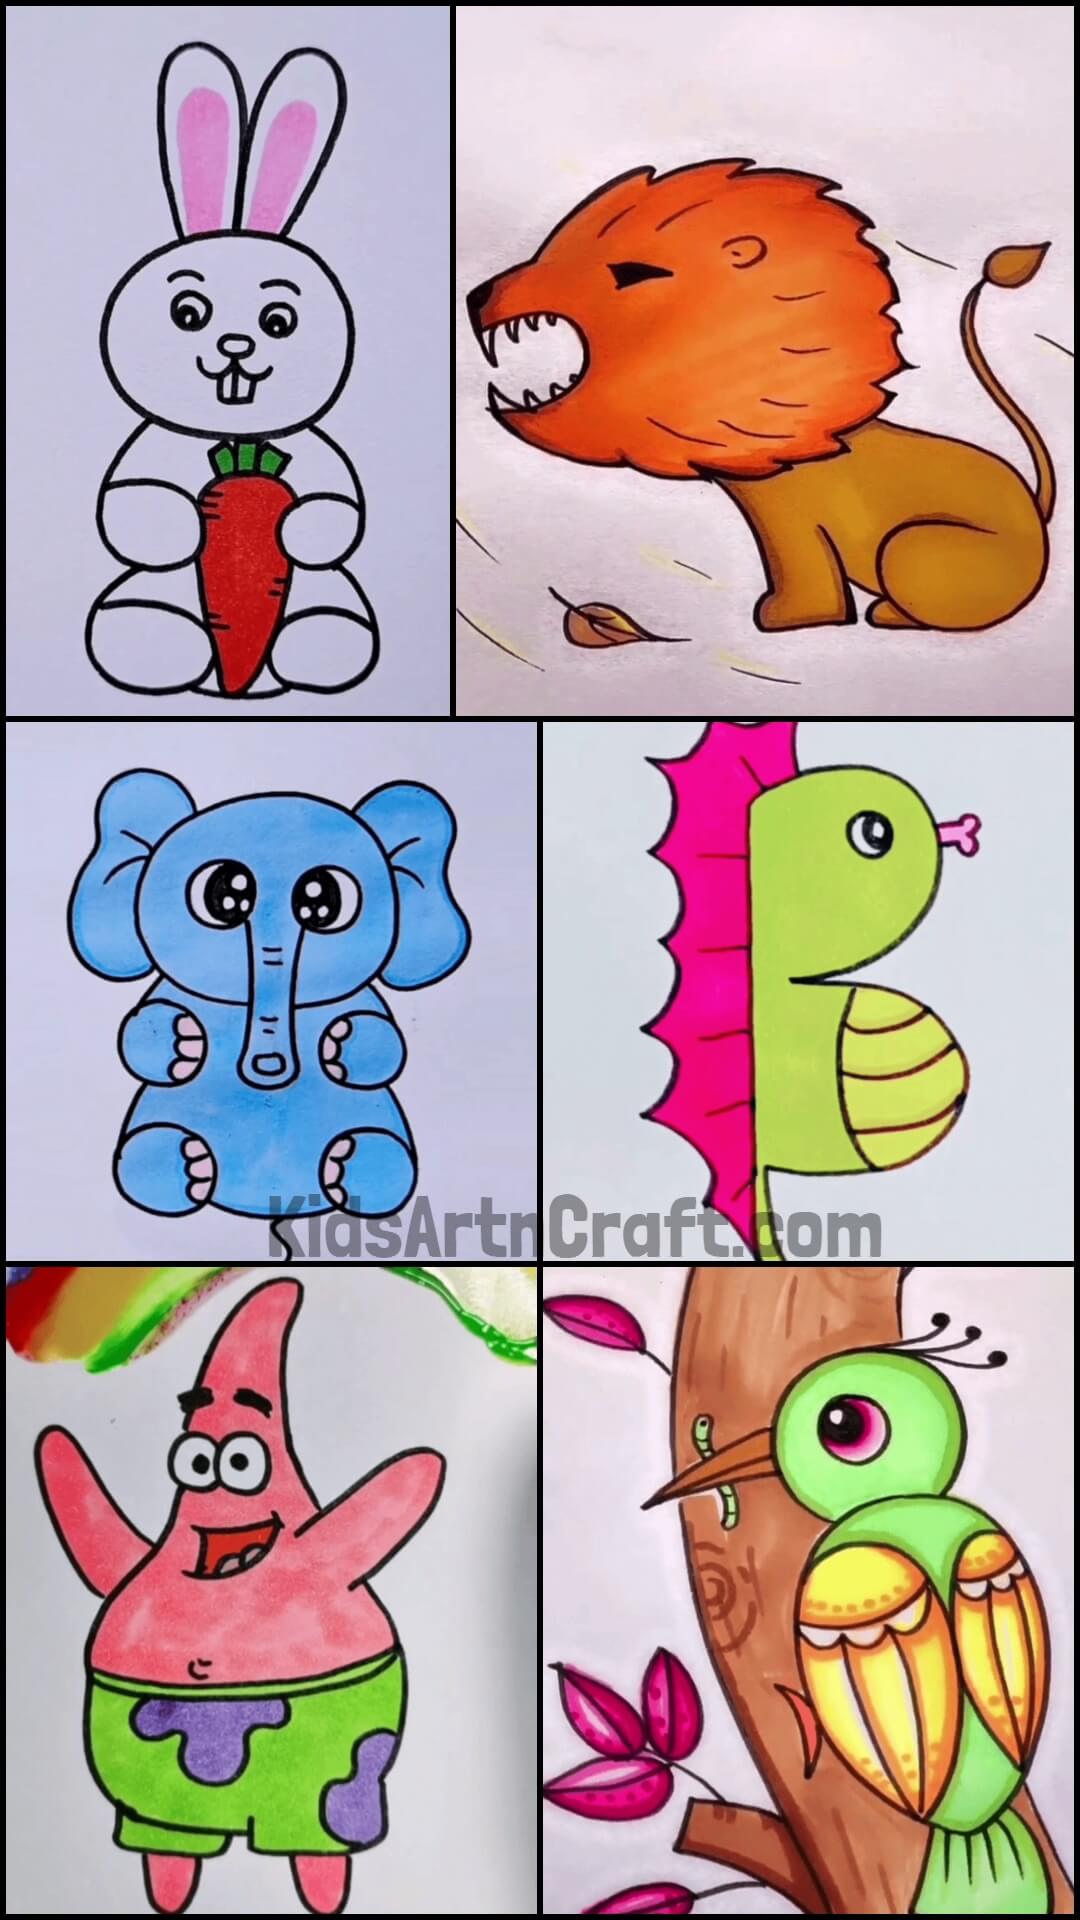 Cute Animal Drawings & Coloring Ideas for Kids